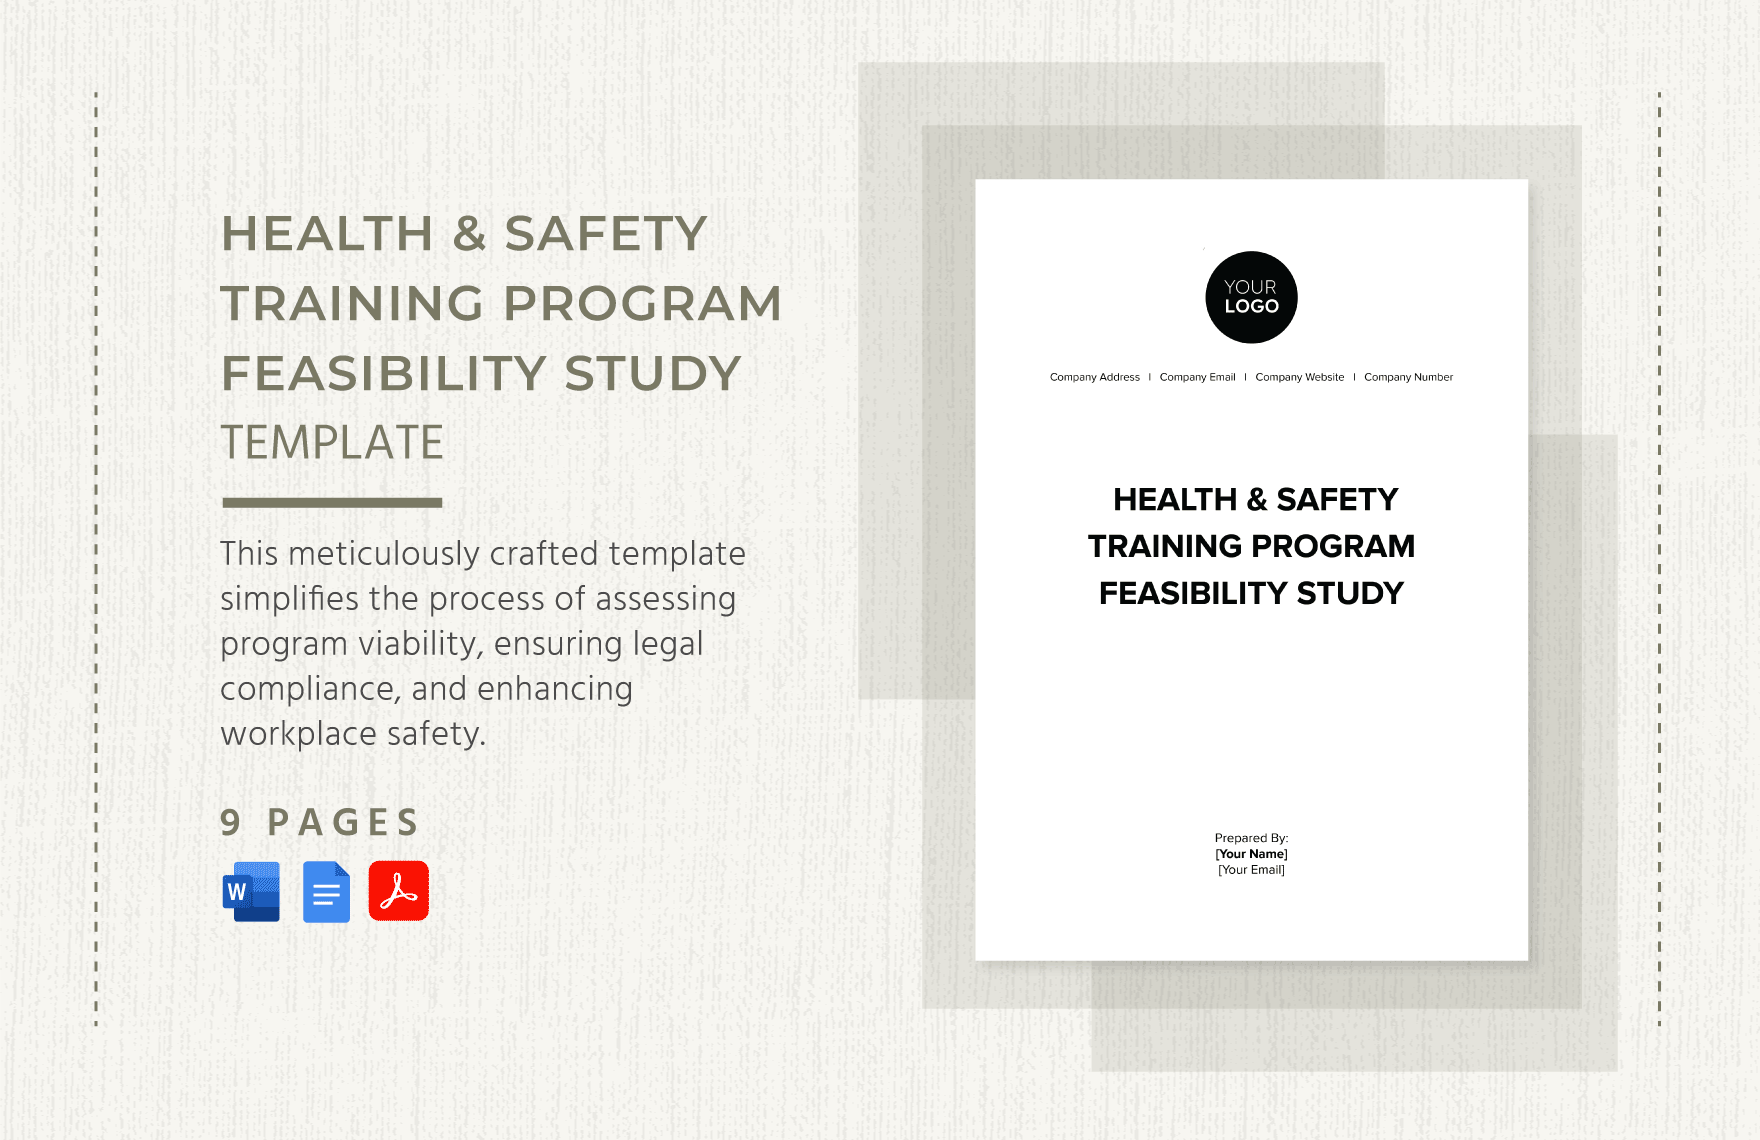 Health & Safety Training Program Feasibility Study Template in Word, Google Docs, PDF